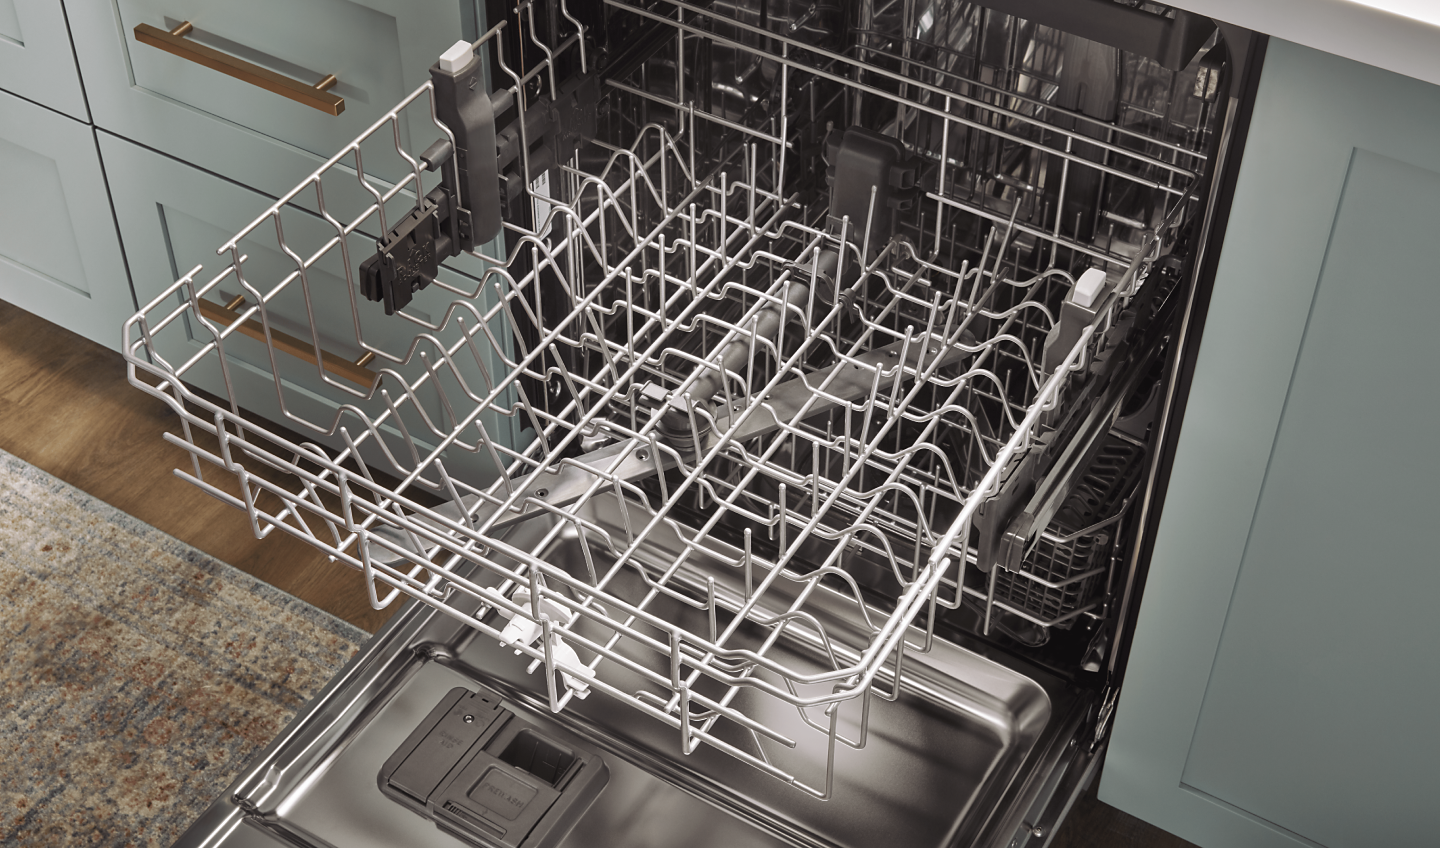 An open dishwasher with an empty top rack extended